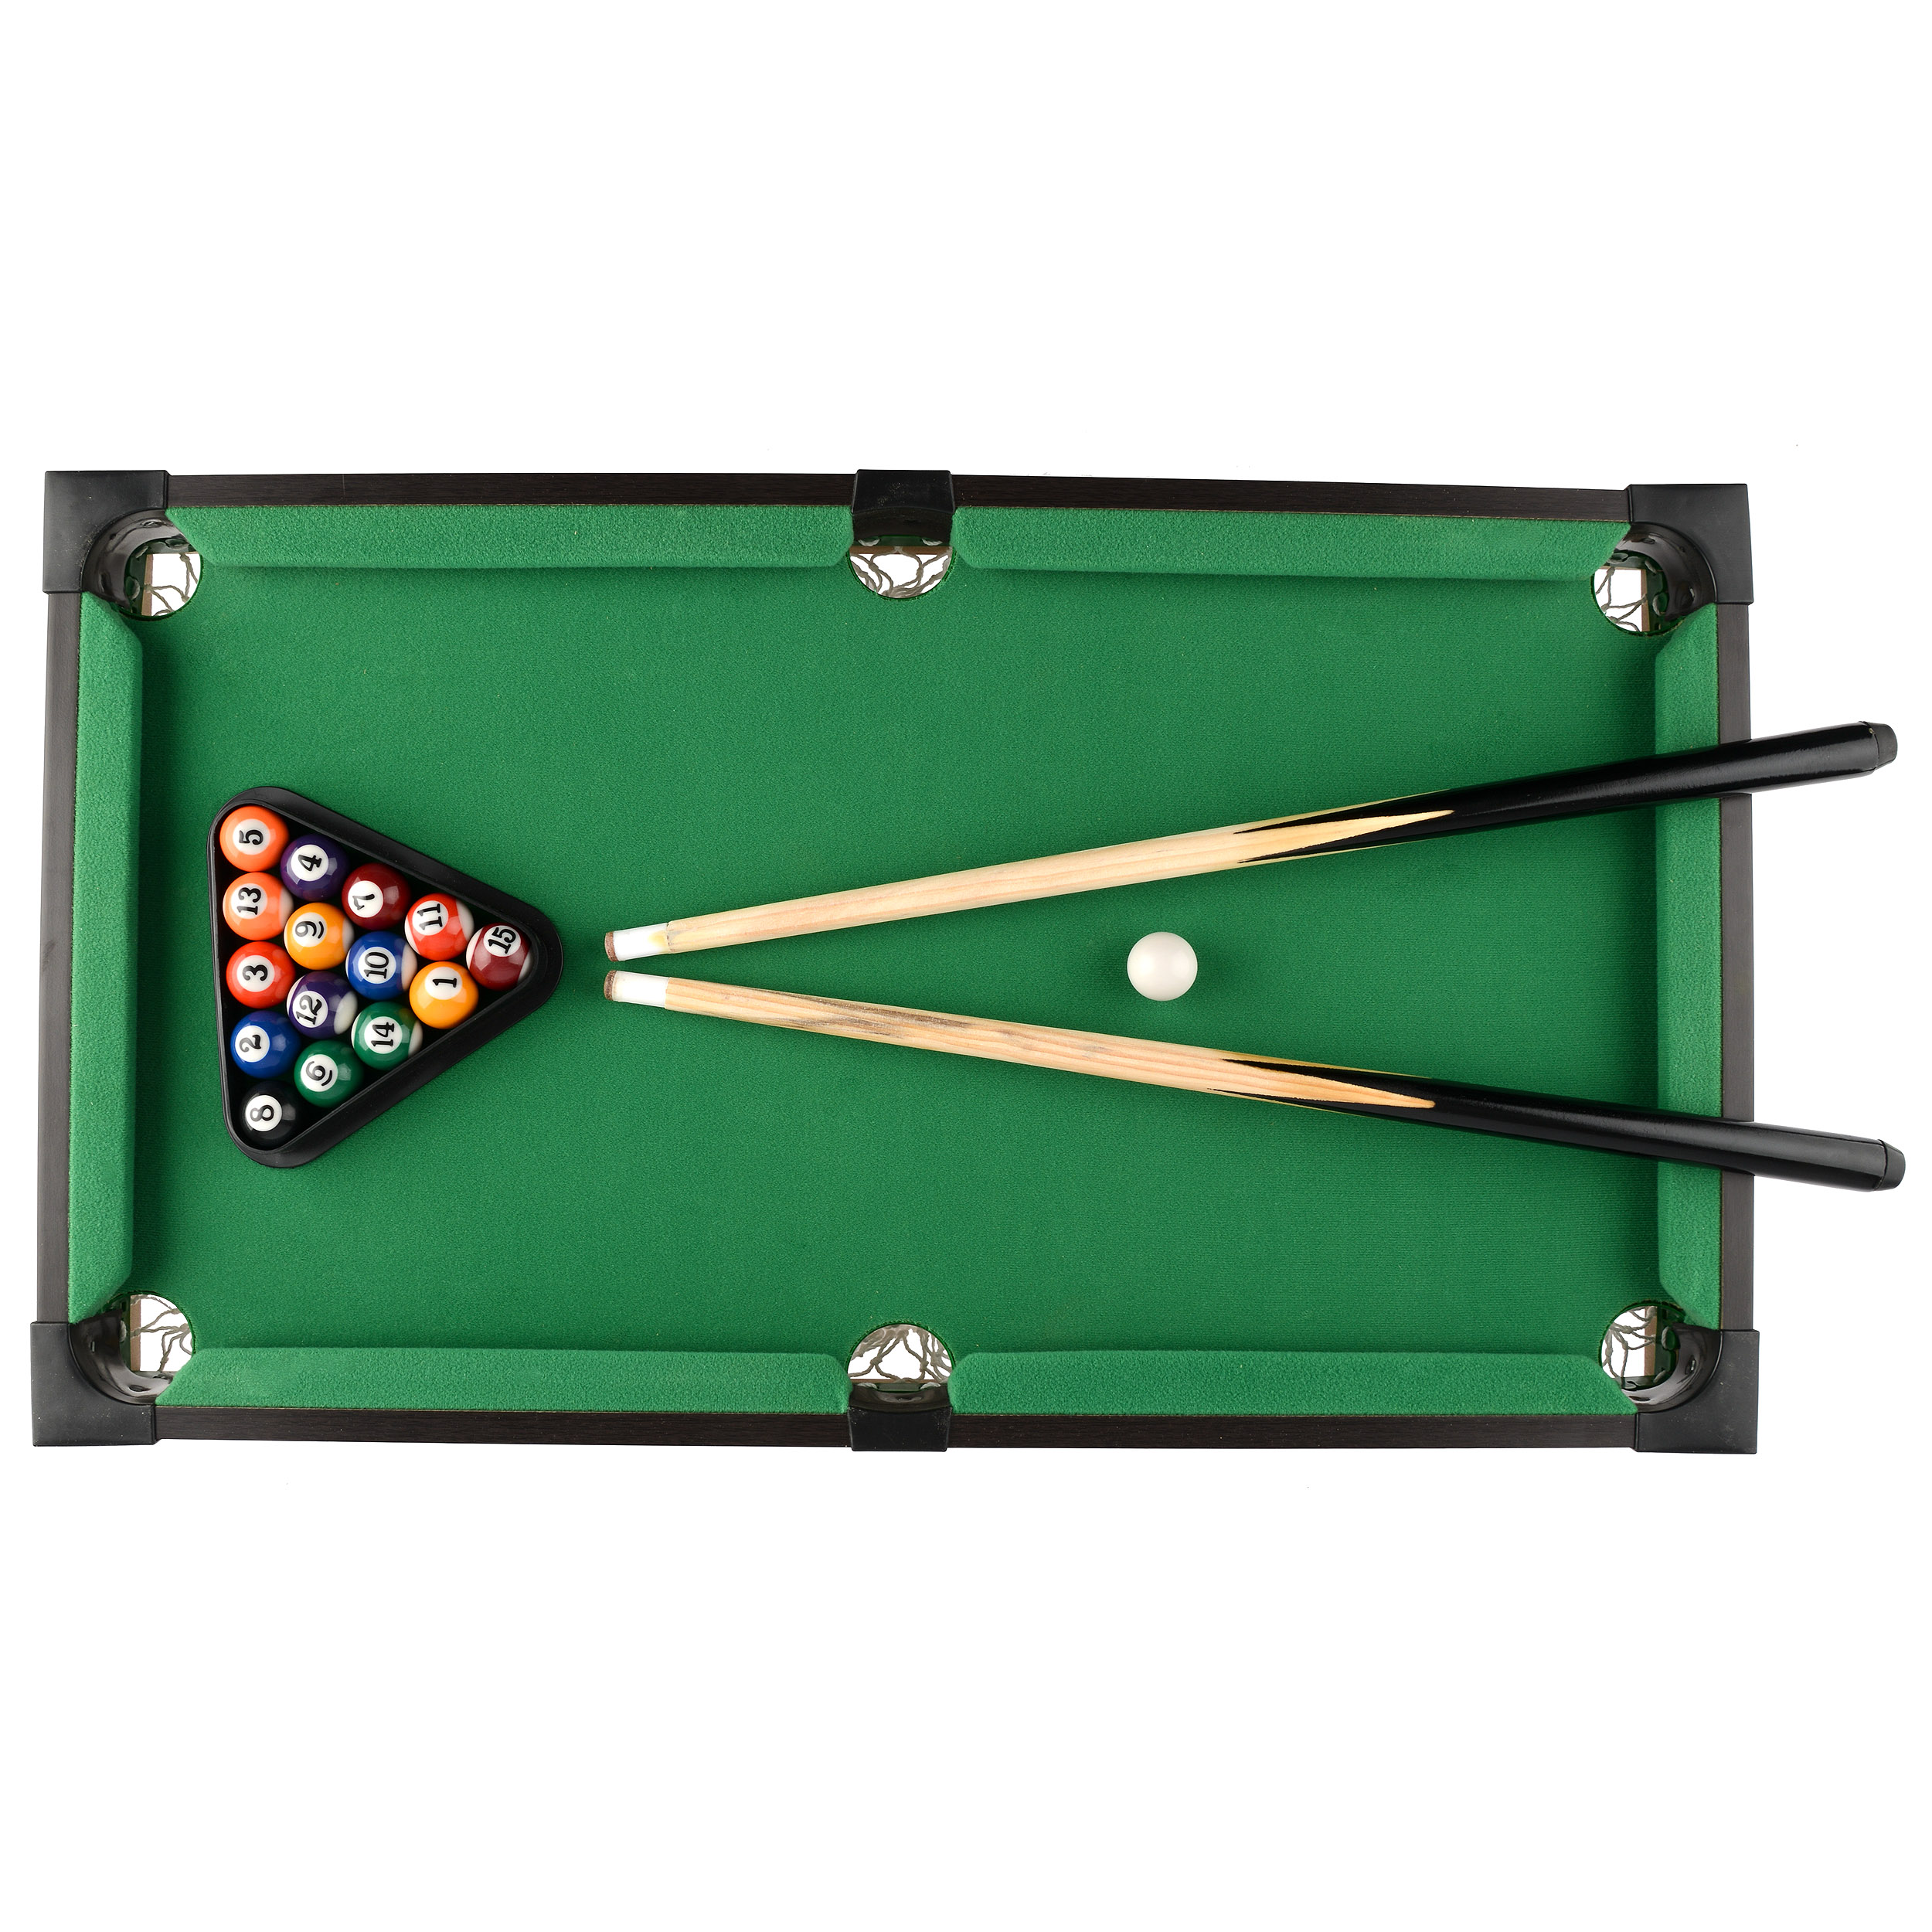 pool table game online